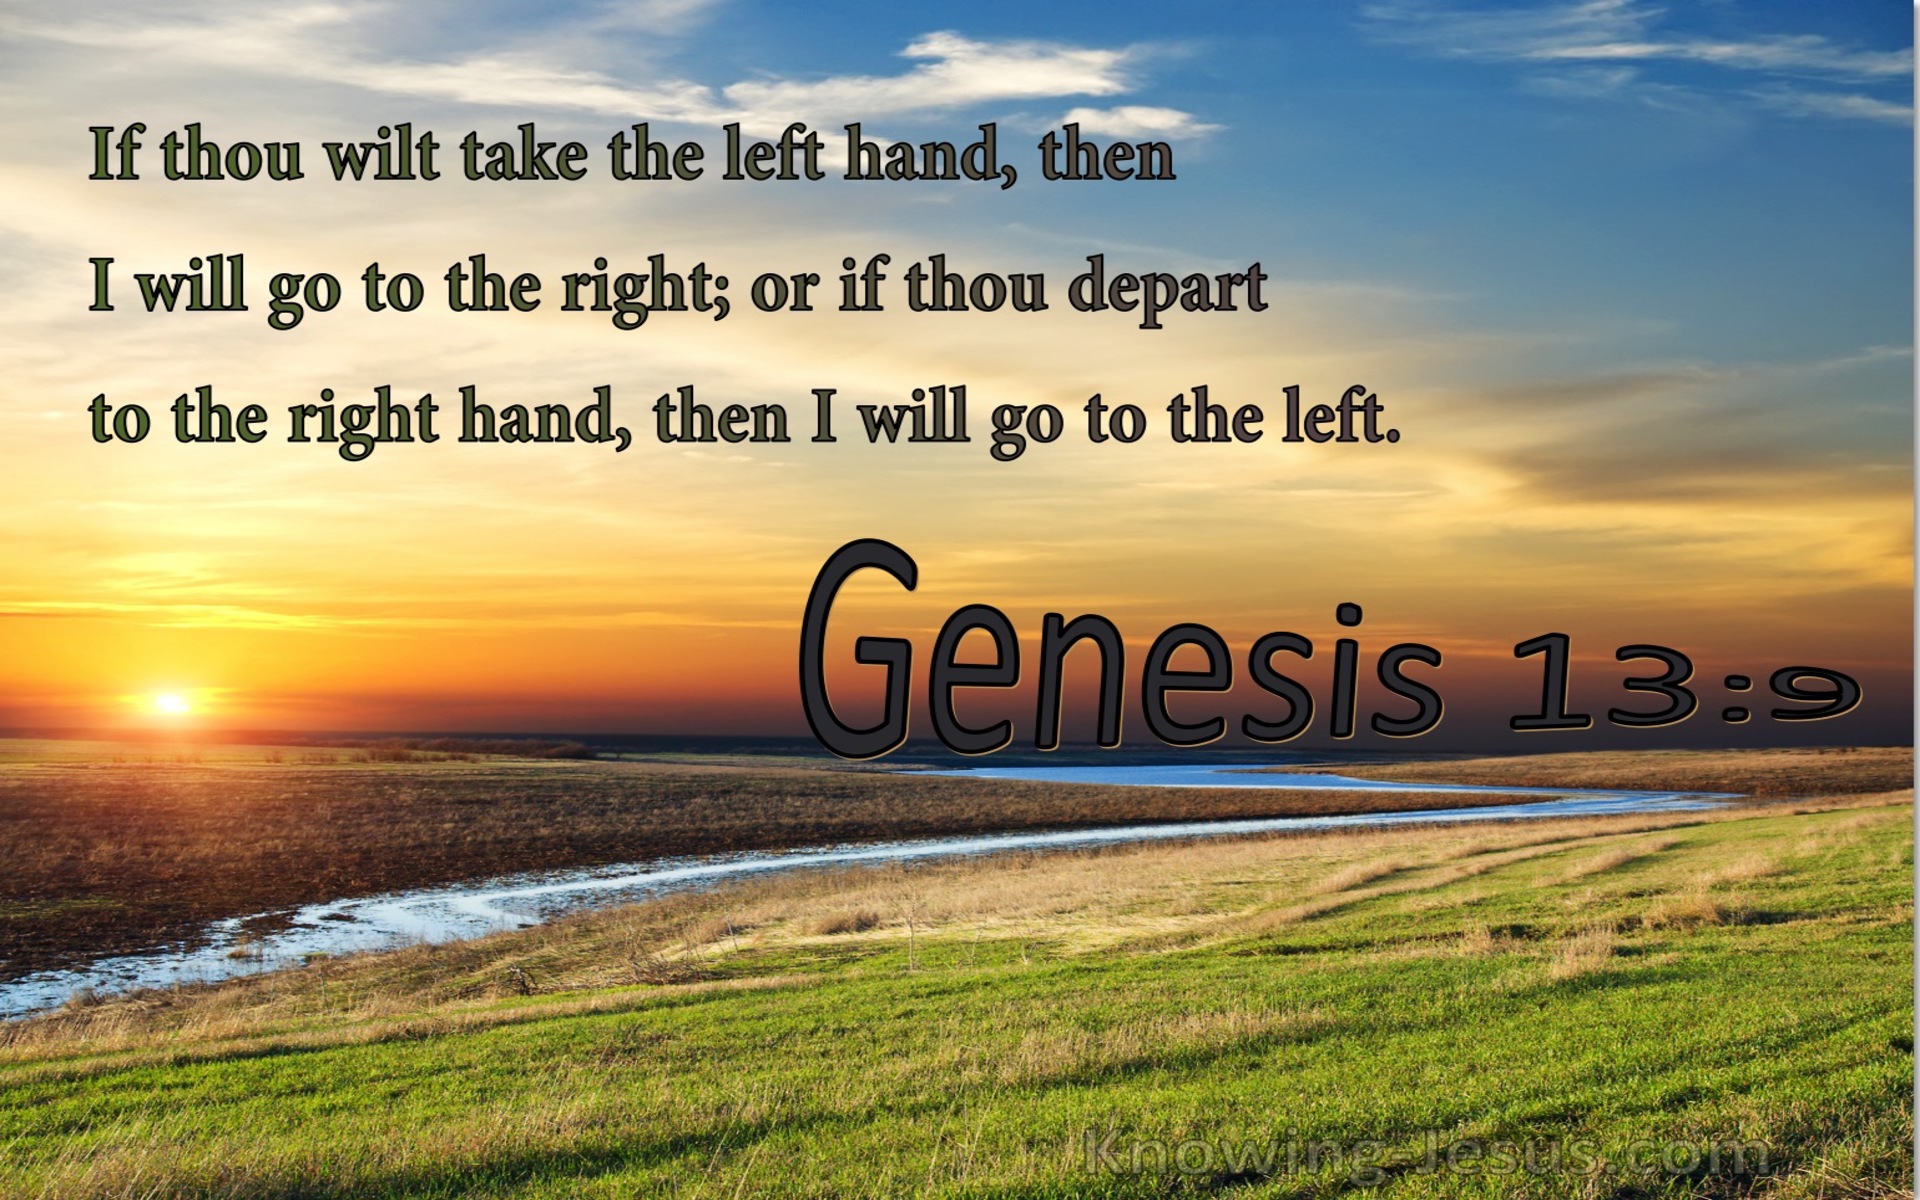 Genesis 13:9 If You Take The Left Hand I Will Go To The Right (utmost)05:25